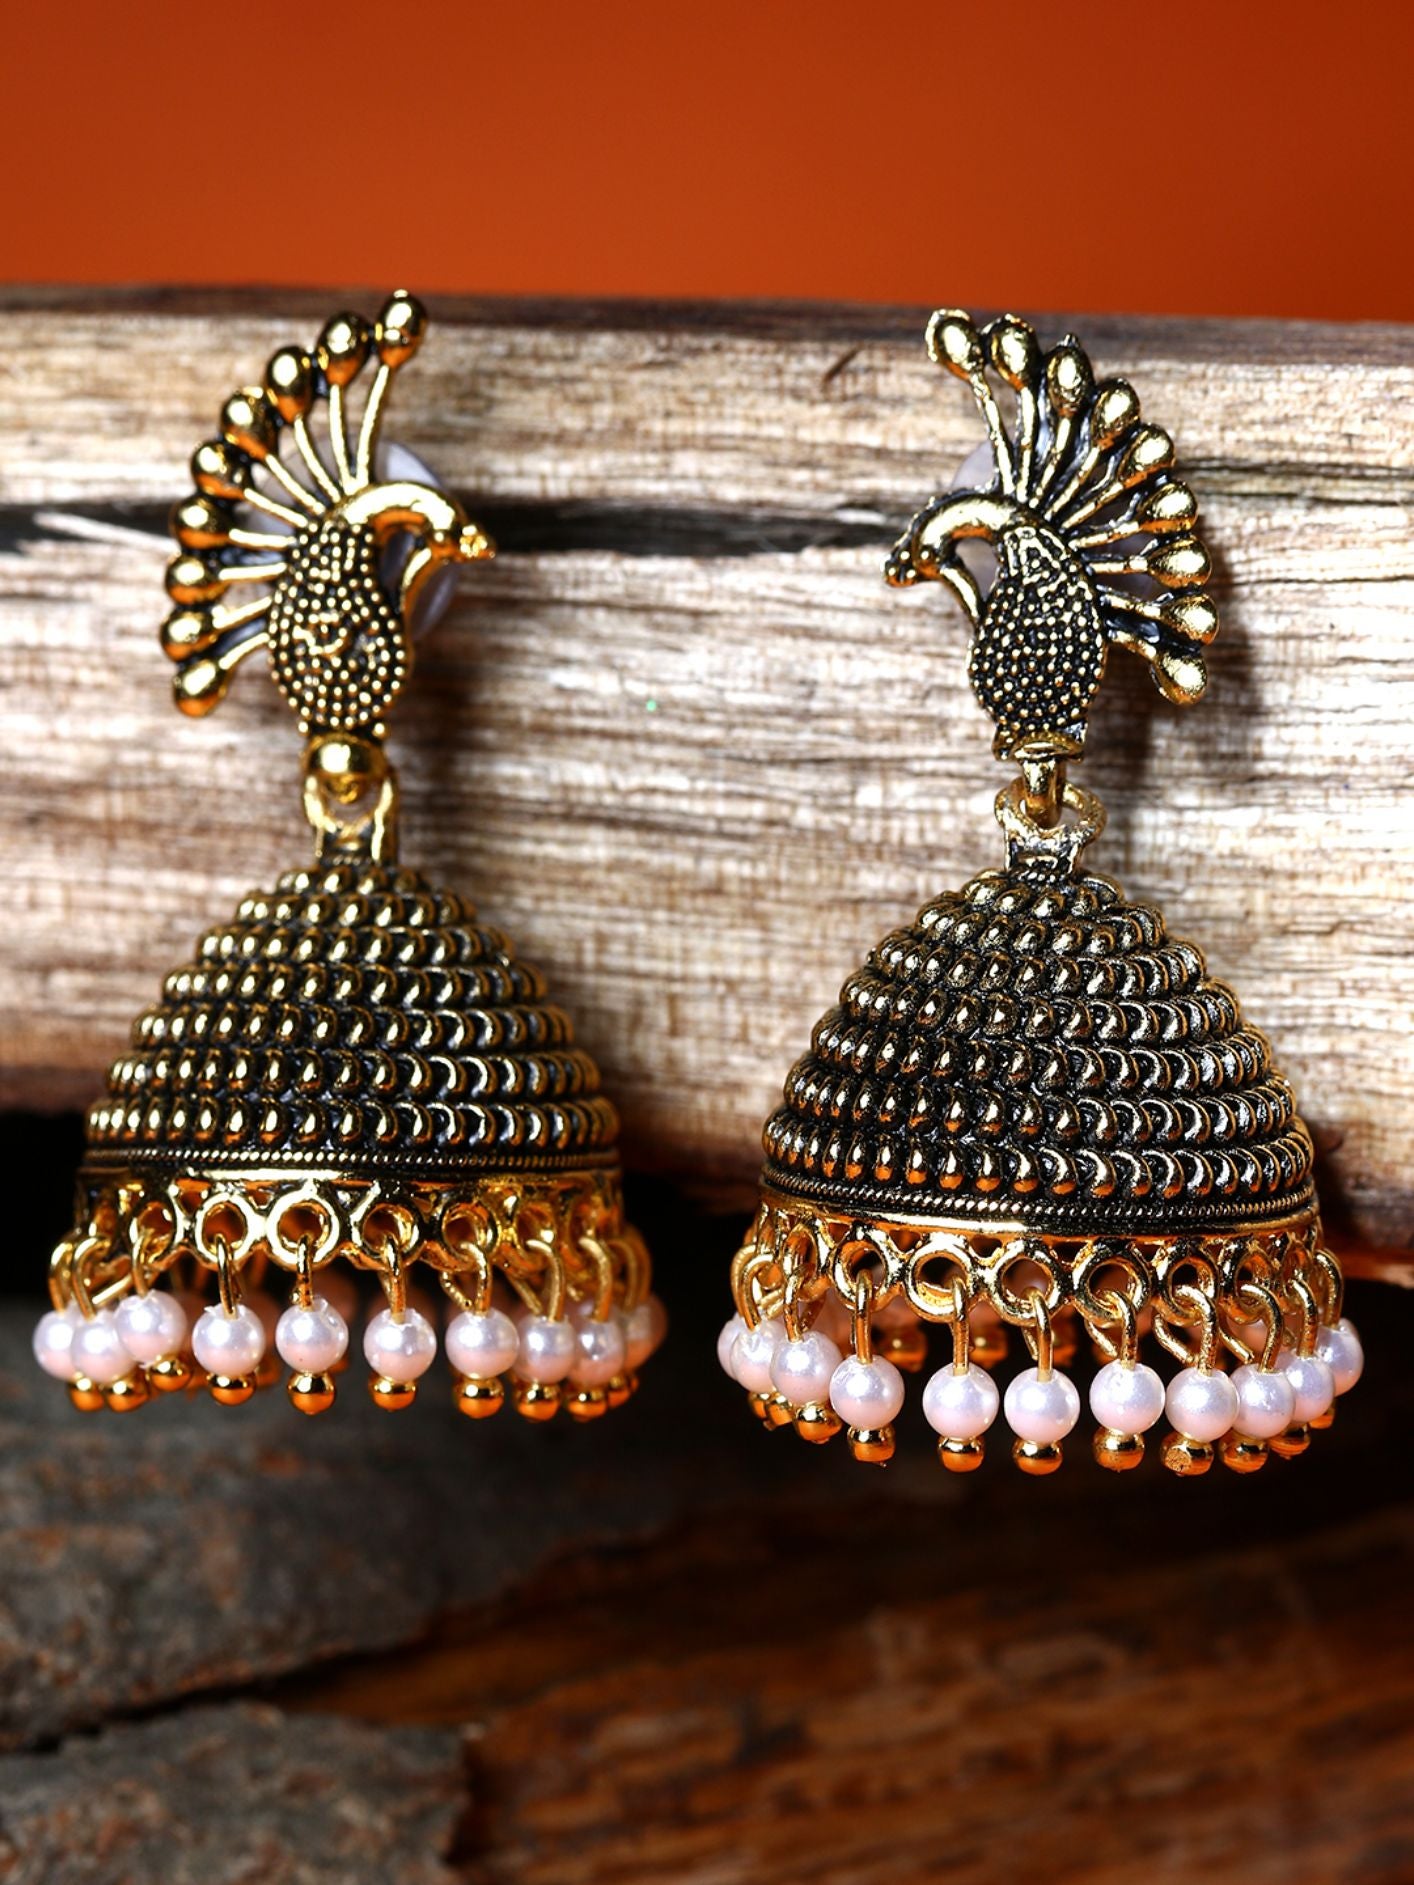 Women's Gold Plated & Black Dome Shaped Enamelled Jhumkas - Anikas Creation